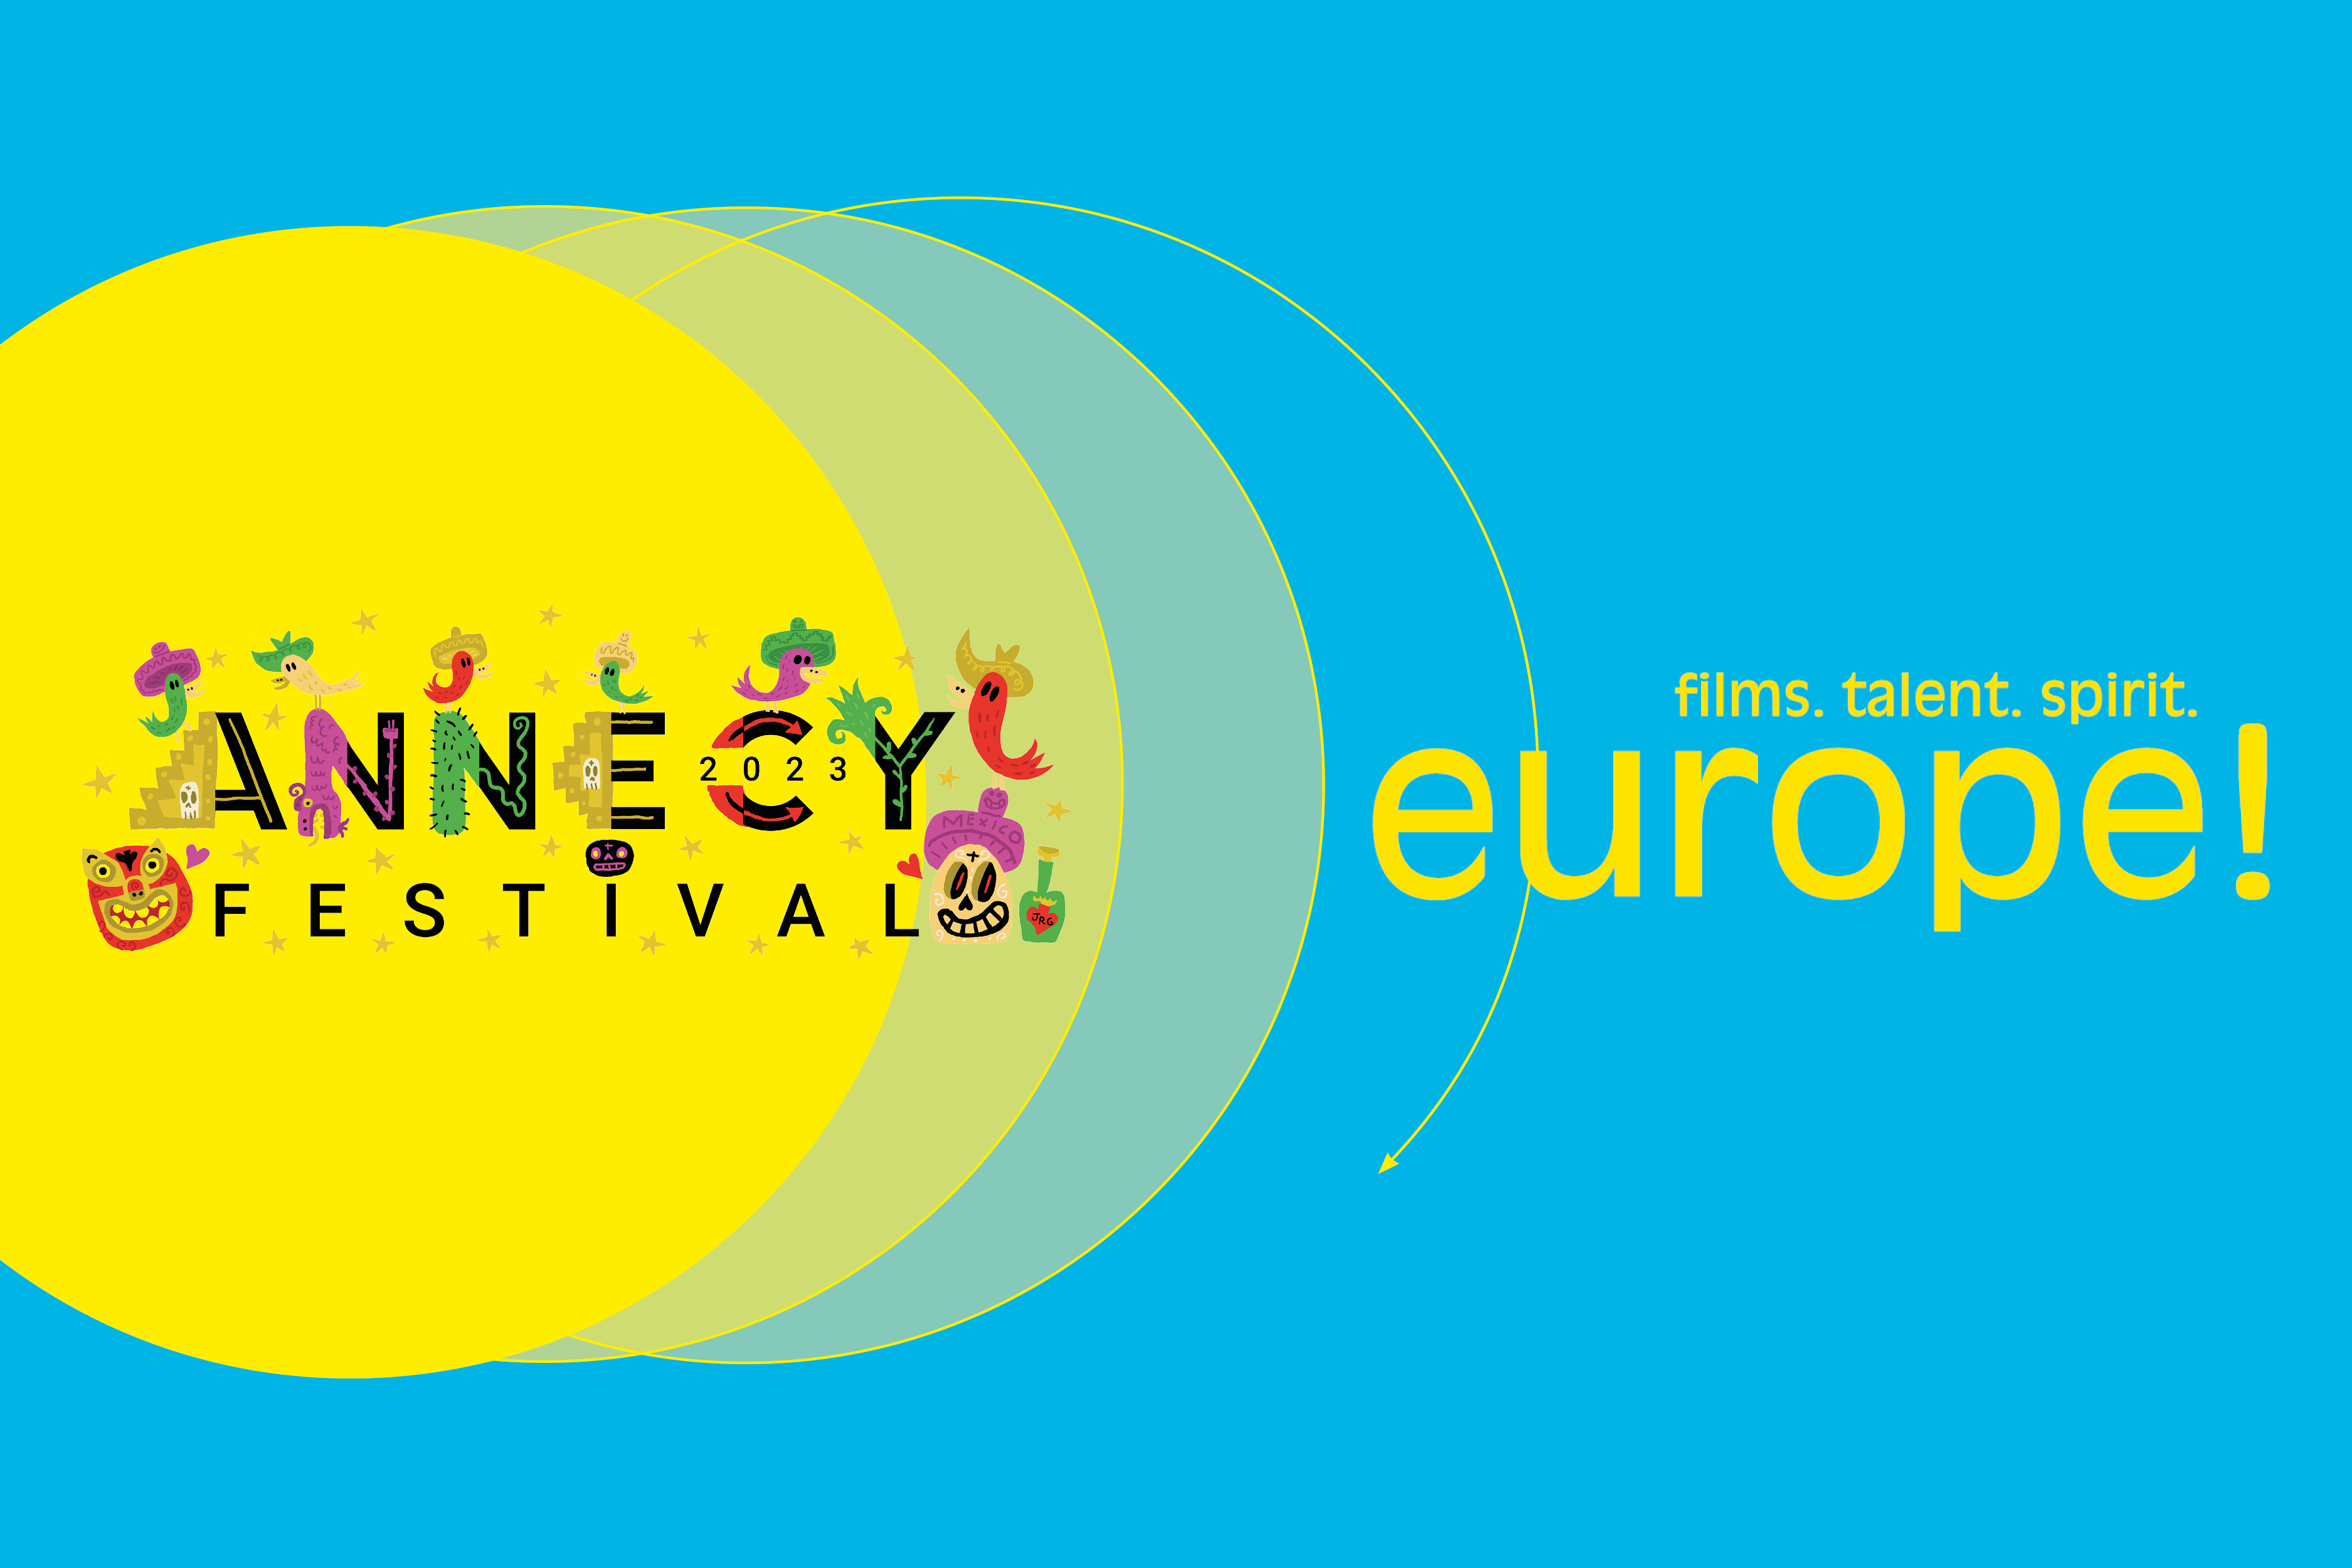 EFP goes Annecy Festival 2023